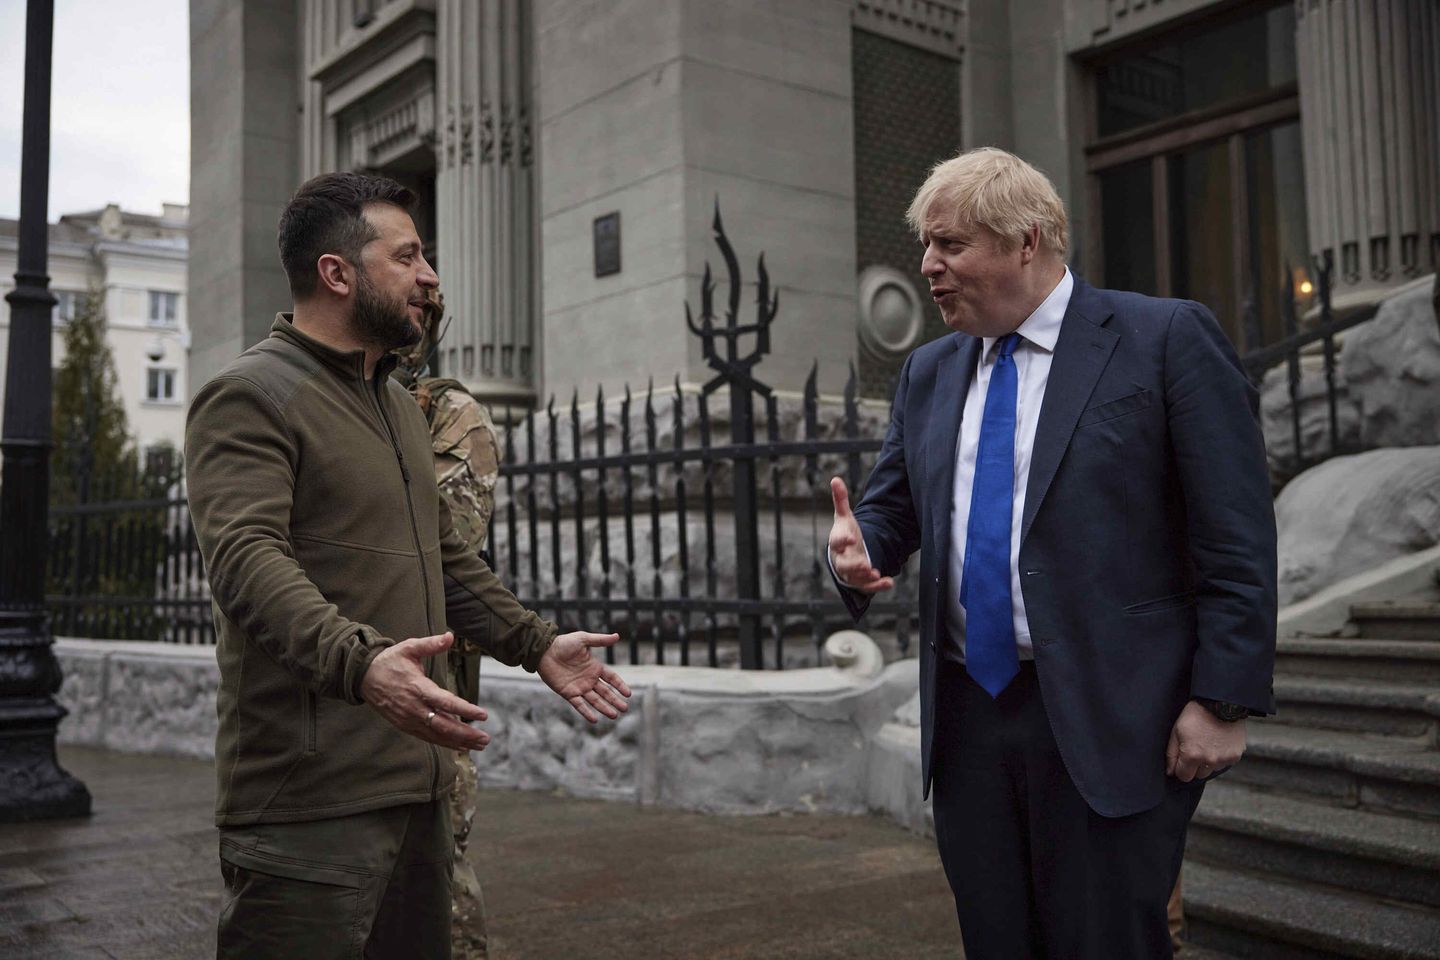 Boris Johnson meets face-to-face with Zelenskyy in Kyiv, pledges additional aid